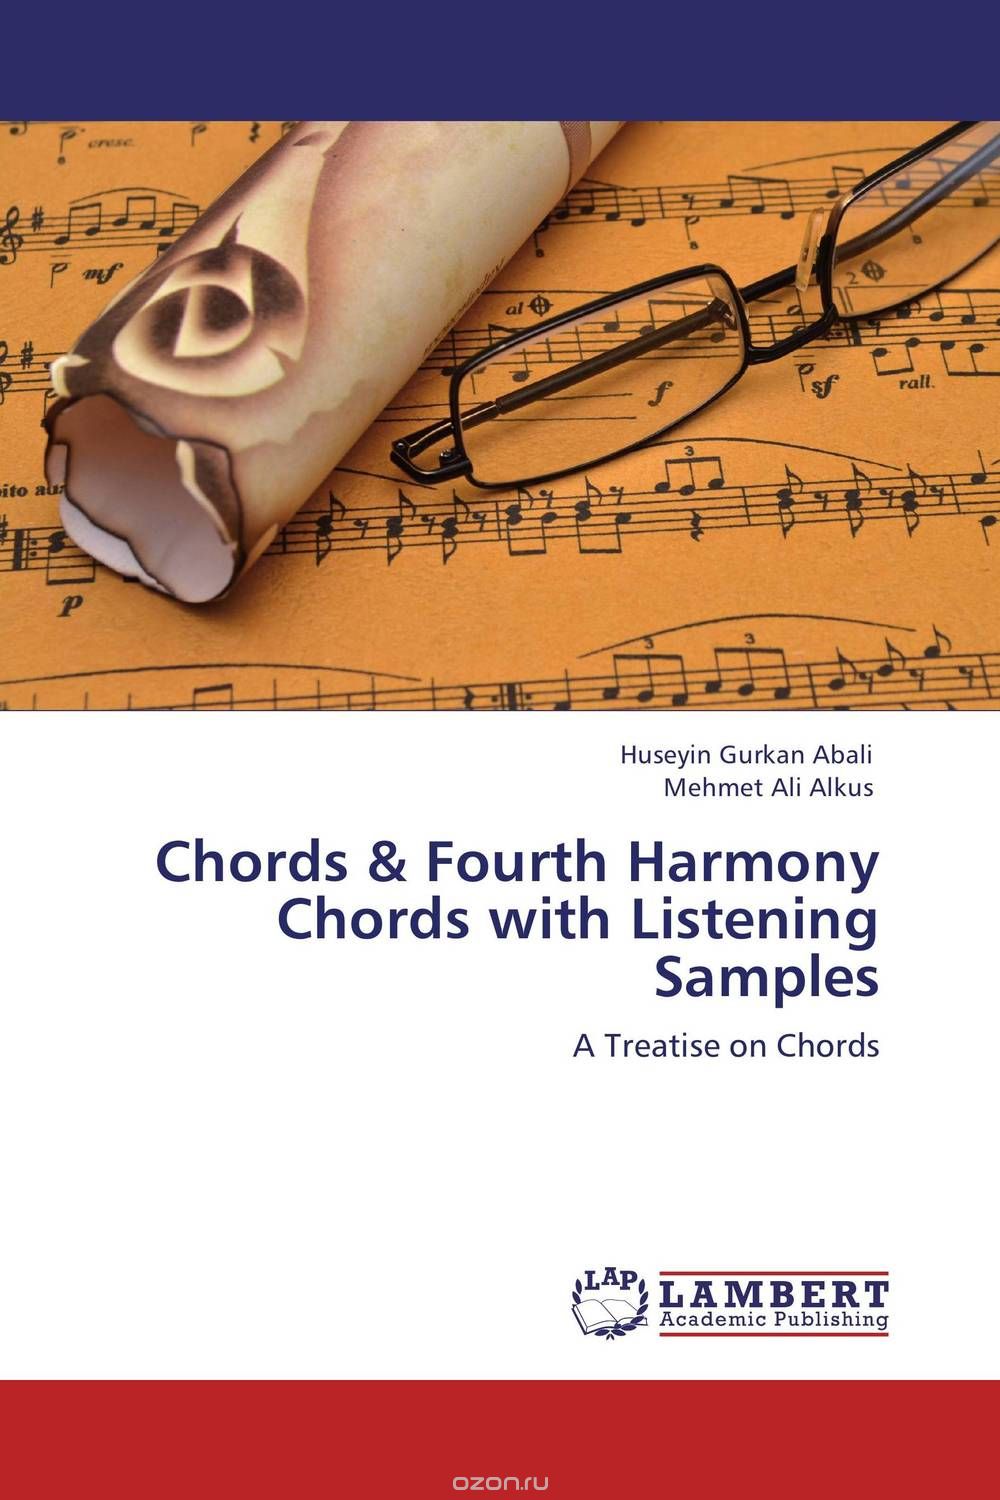 Chords & Fourth Harmony Chords with Listening Samples